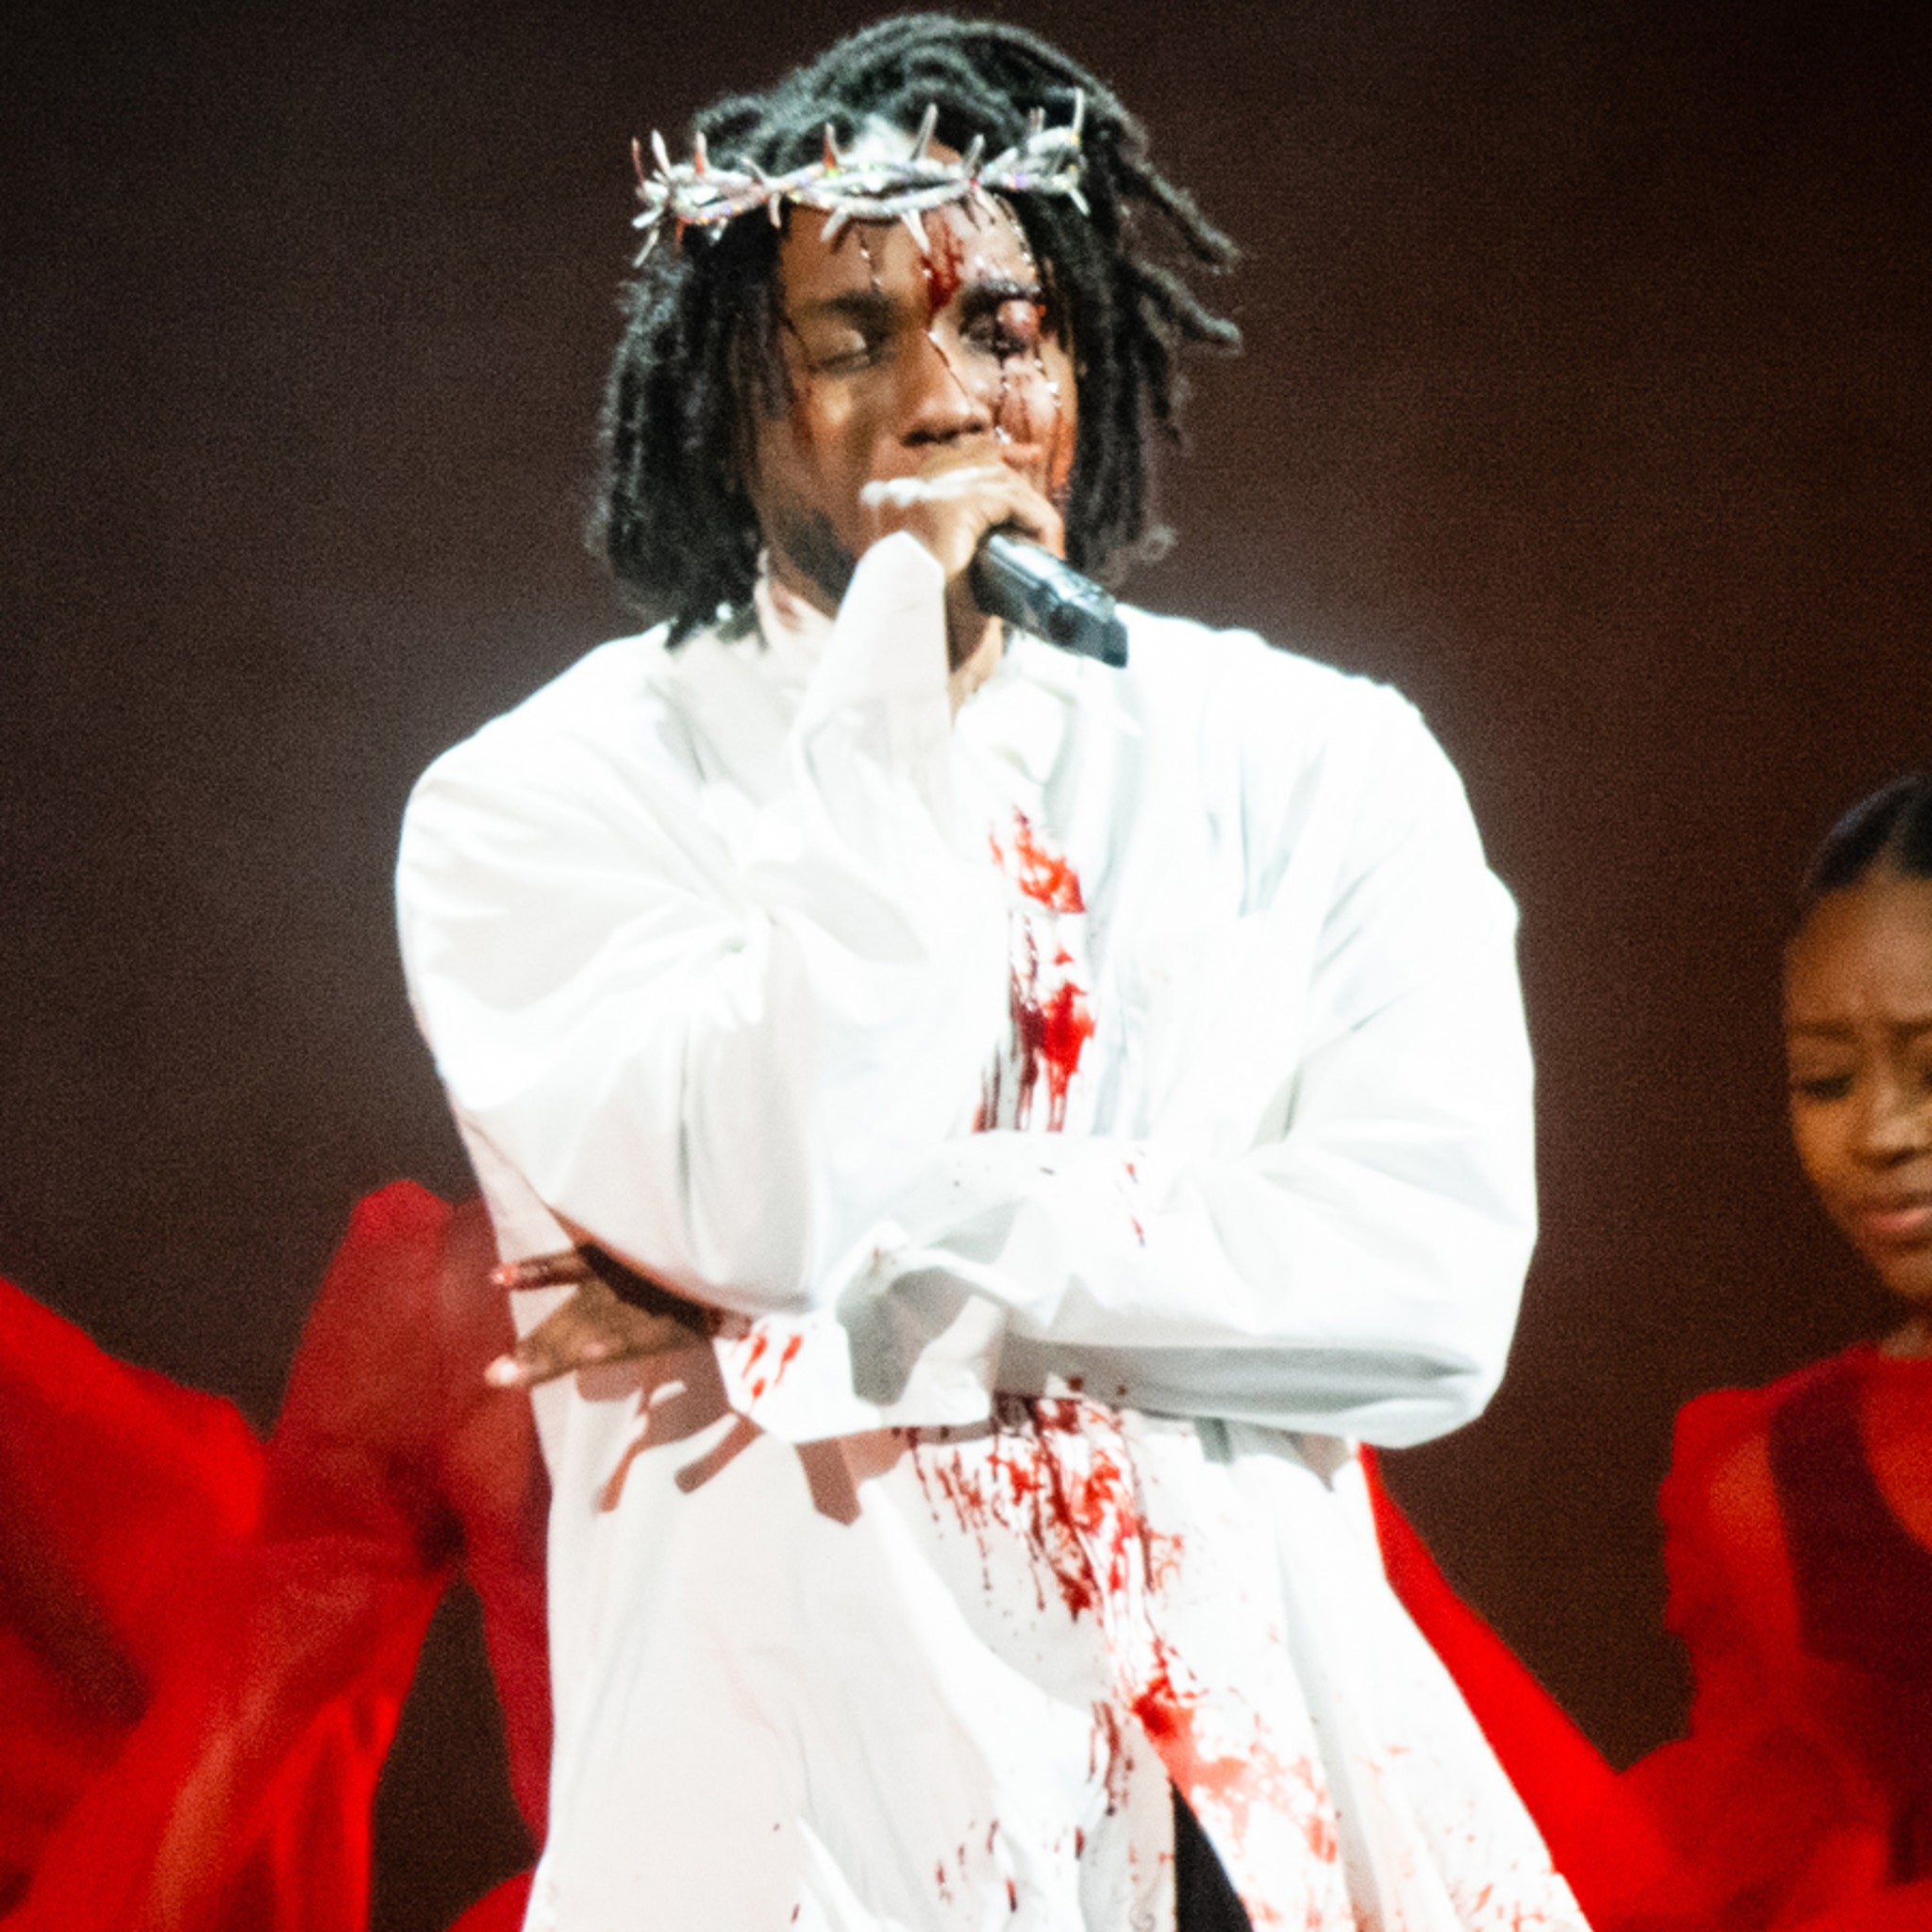 Kendrick Lamar Wears Crown Of Thorns And High Heals While Performing At  Louis Vuitton Fashion Show 